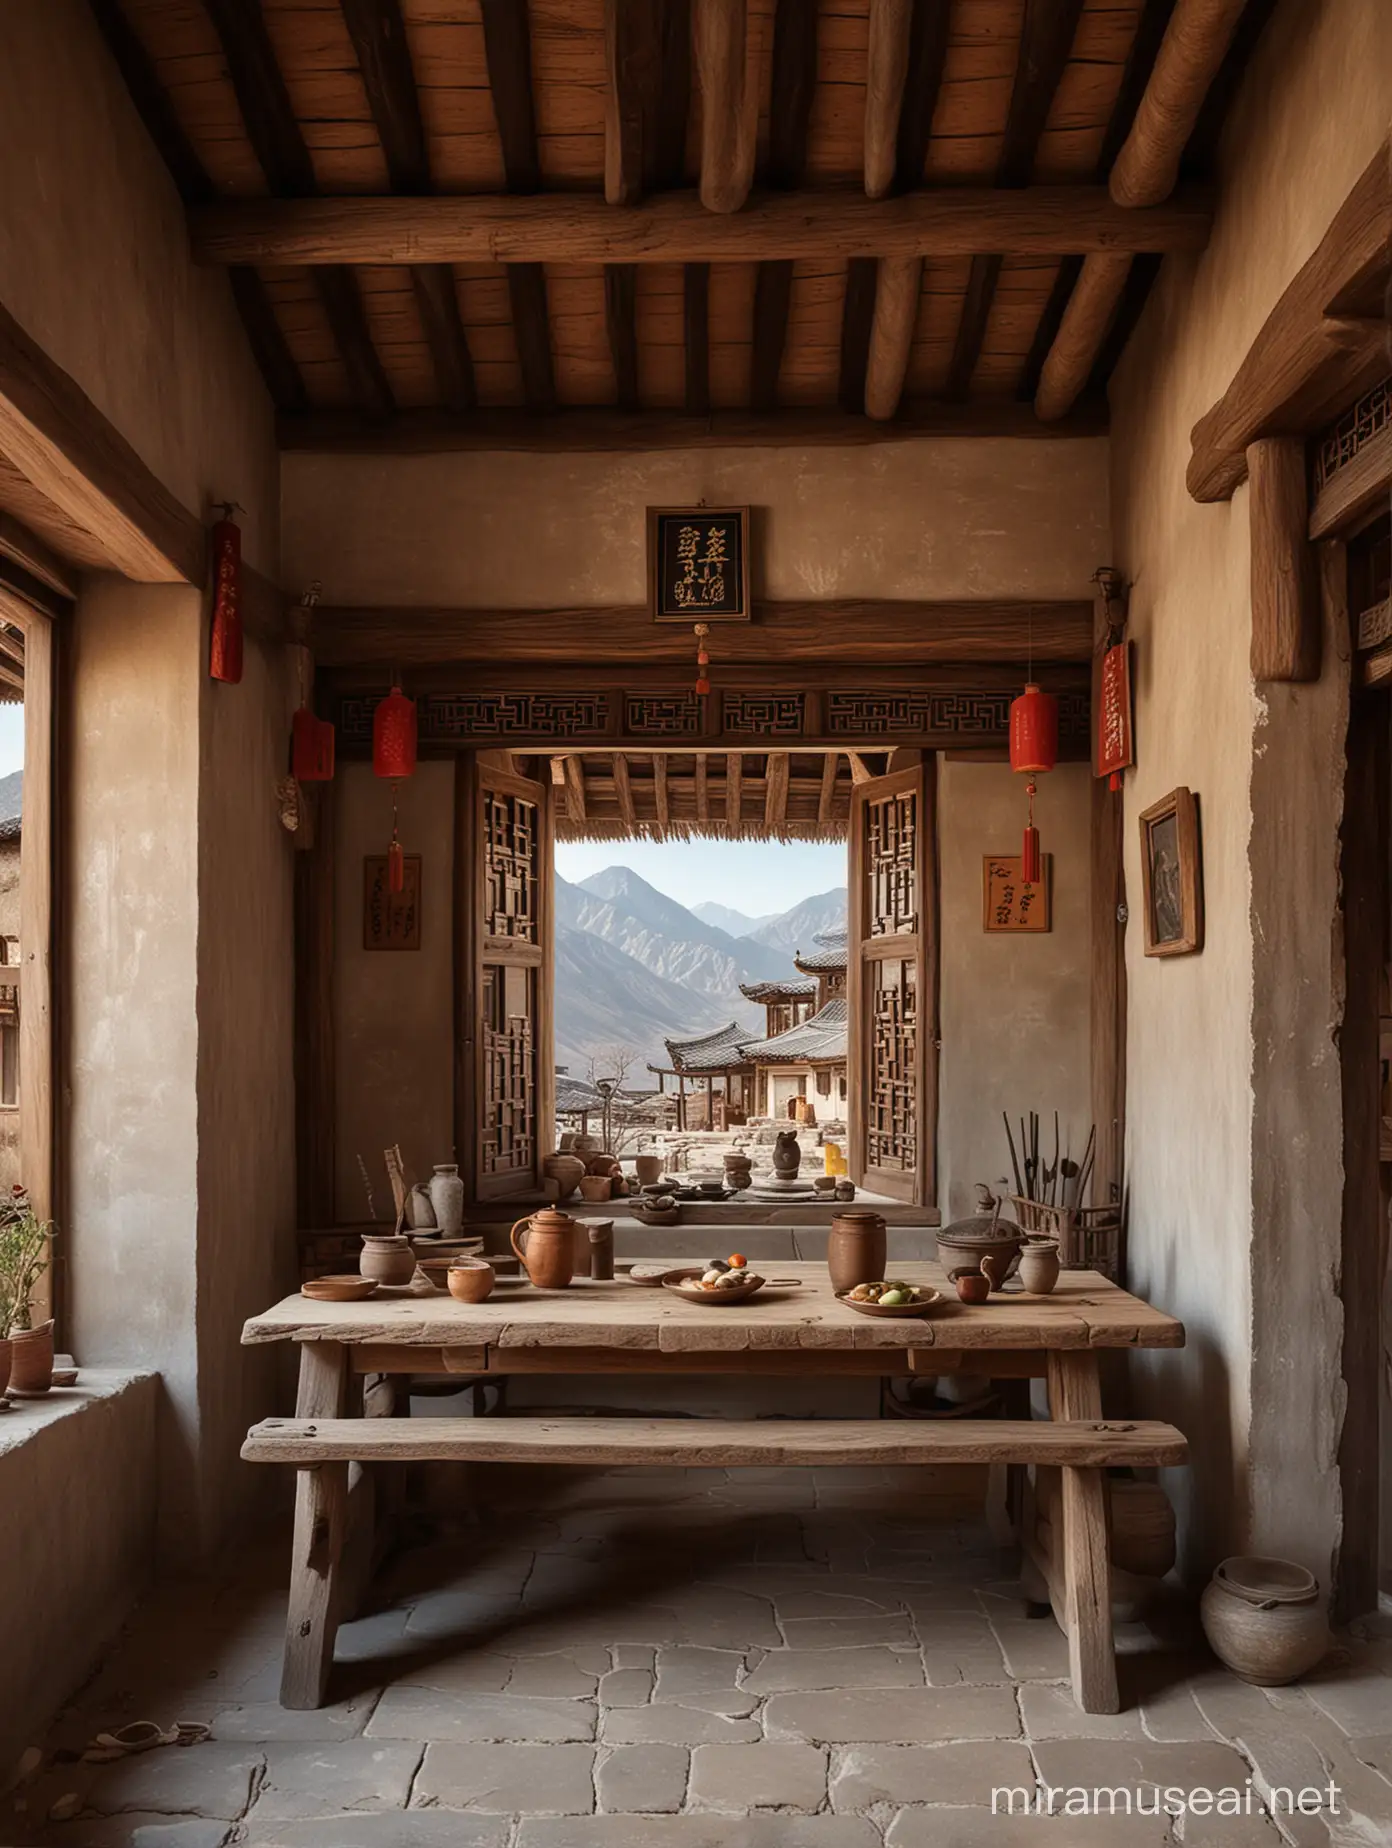 ChineseStyle Mountain Village with Ancient Chiefs Table